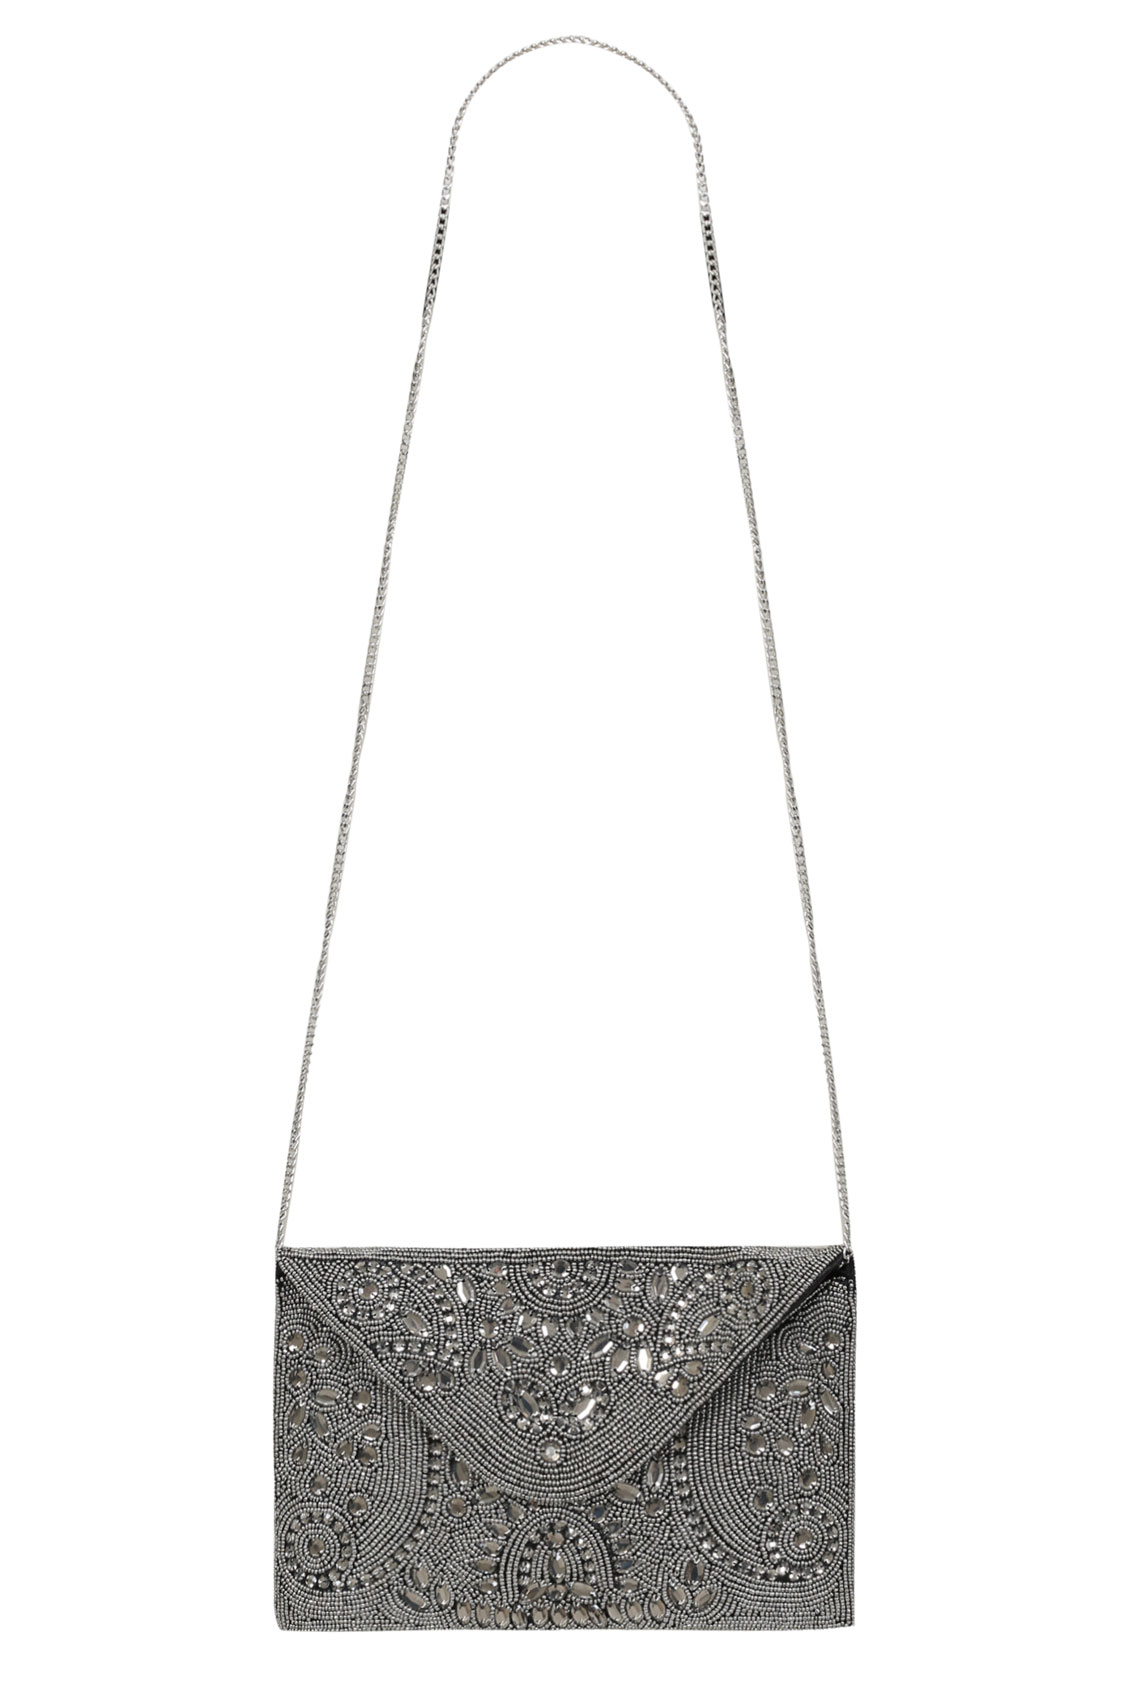 Silver Hand Beaded Occasion Clutch Bag With Chain Strap